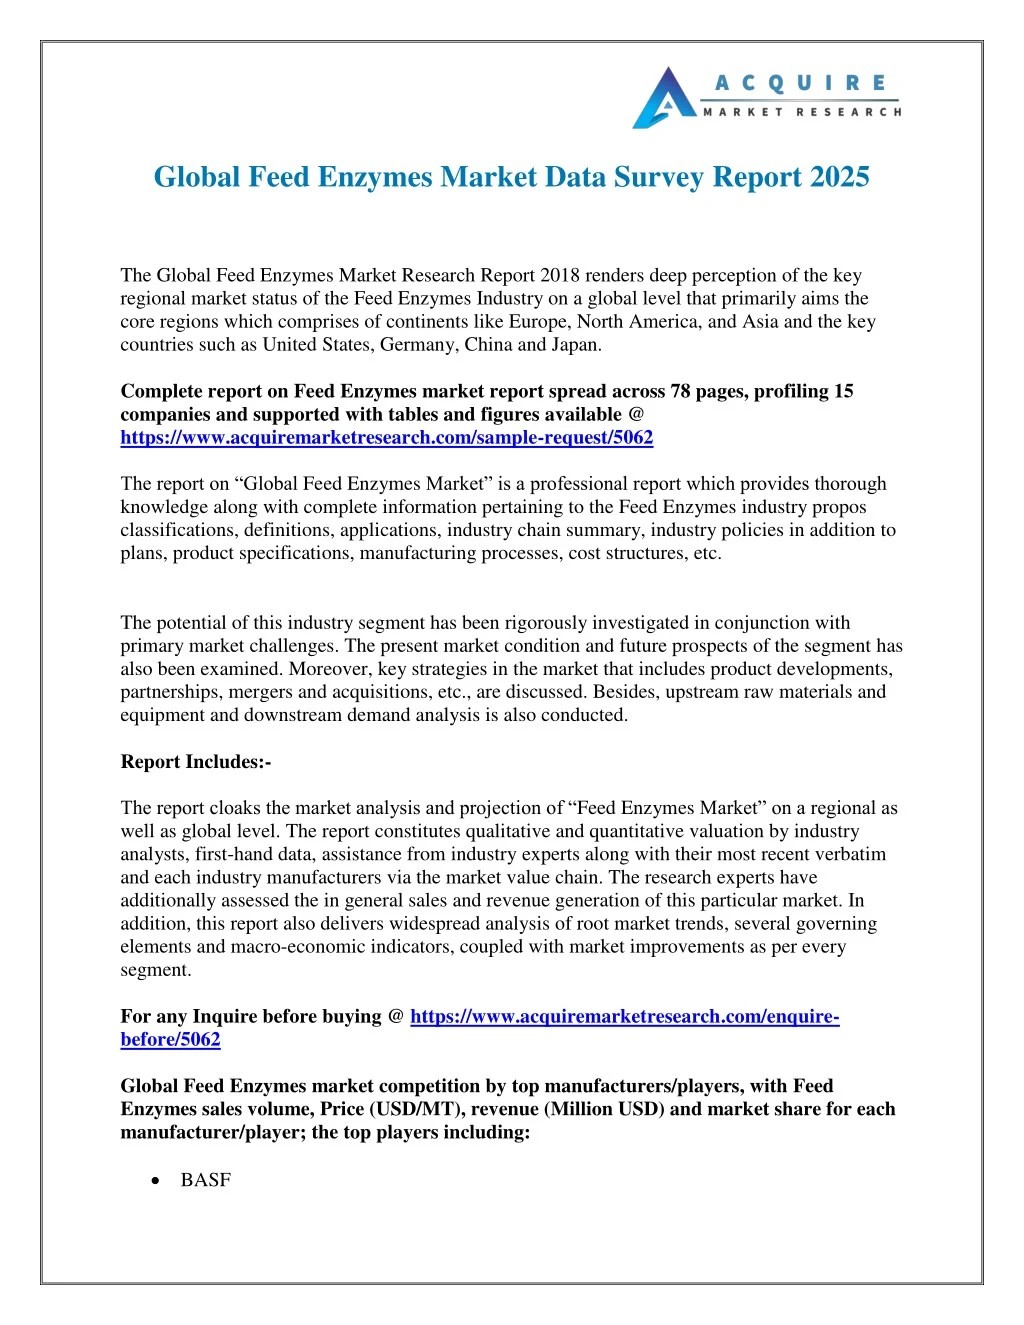 global feed enzymes market data survey report 2025